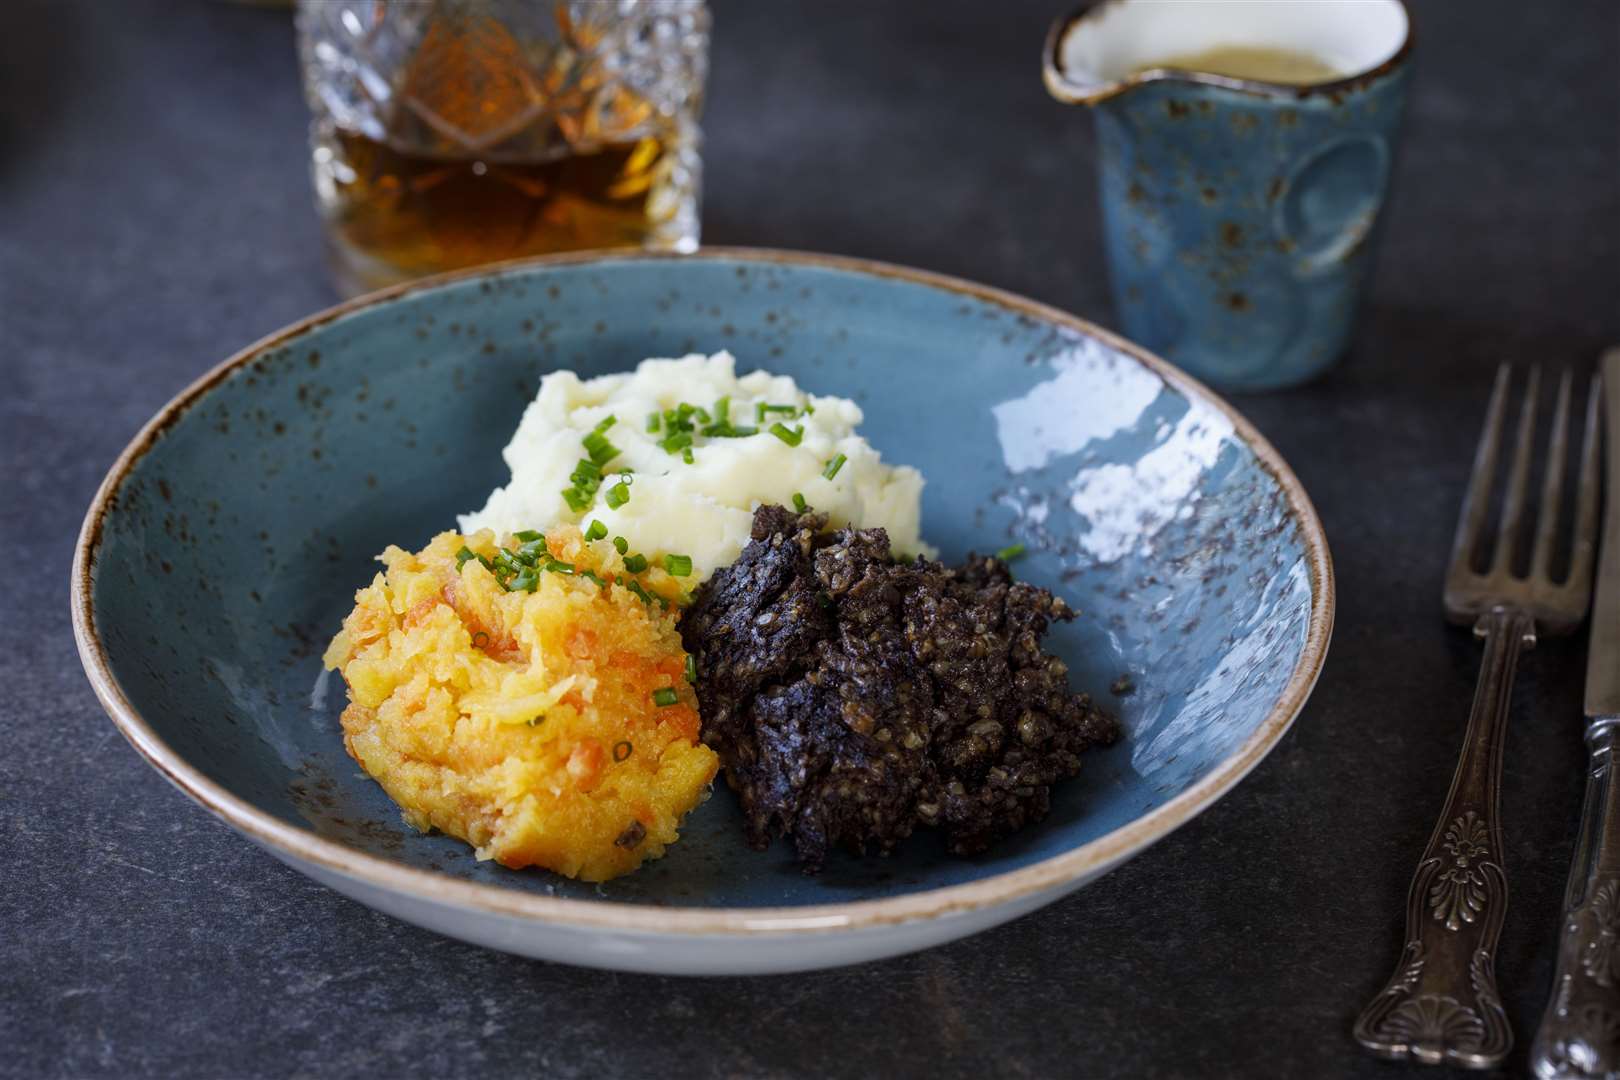 Celebrate Burns Night with a haggis at home.